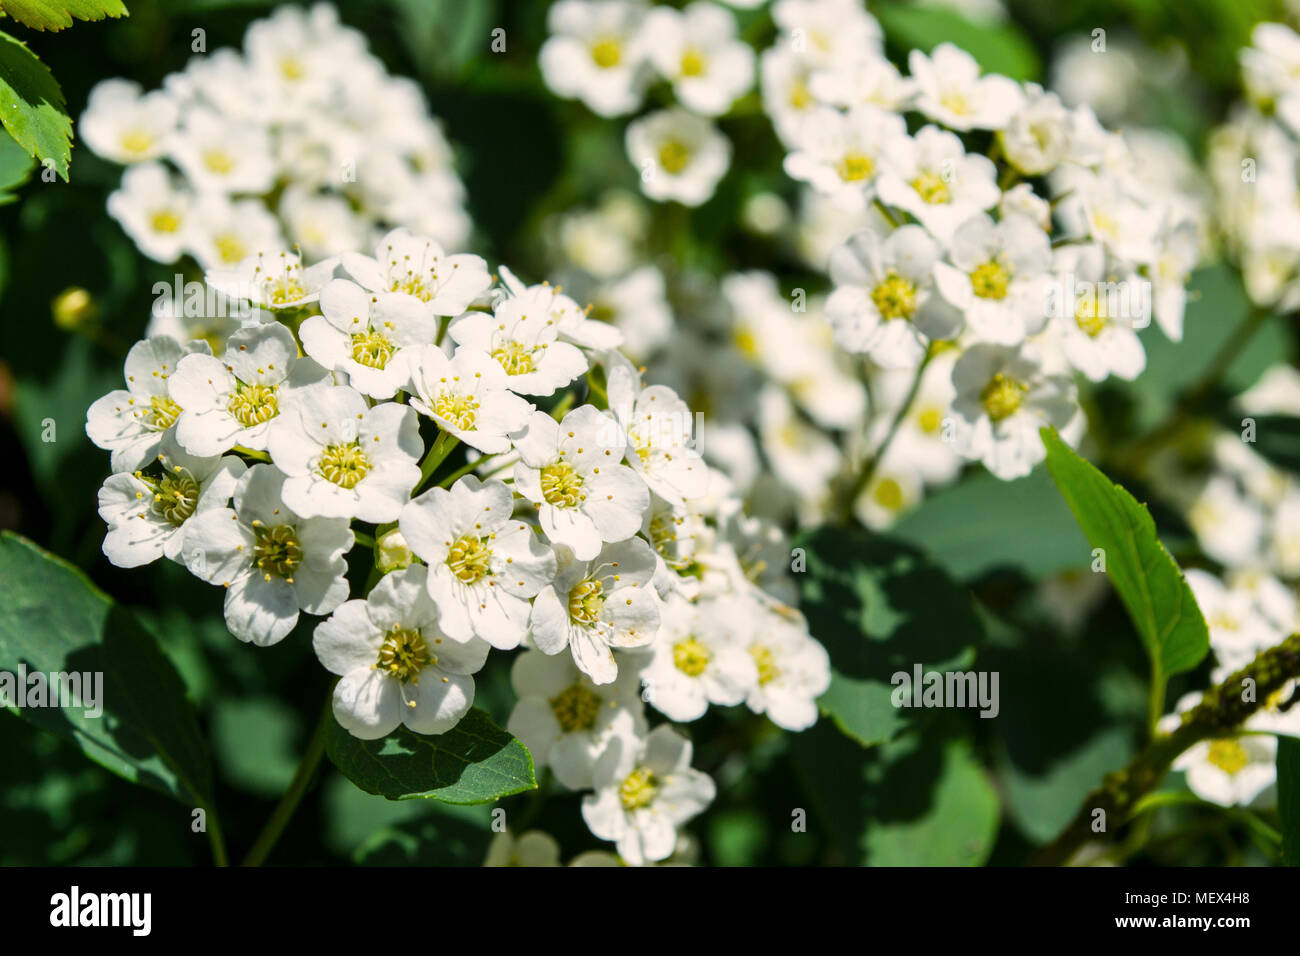 Close-up of a blossomed Spiraea shrub in the sun Stock Photo